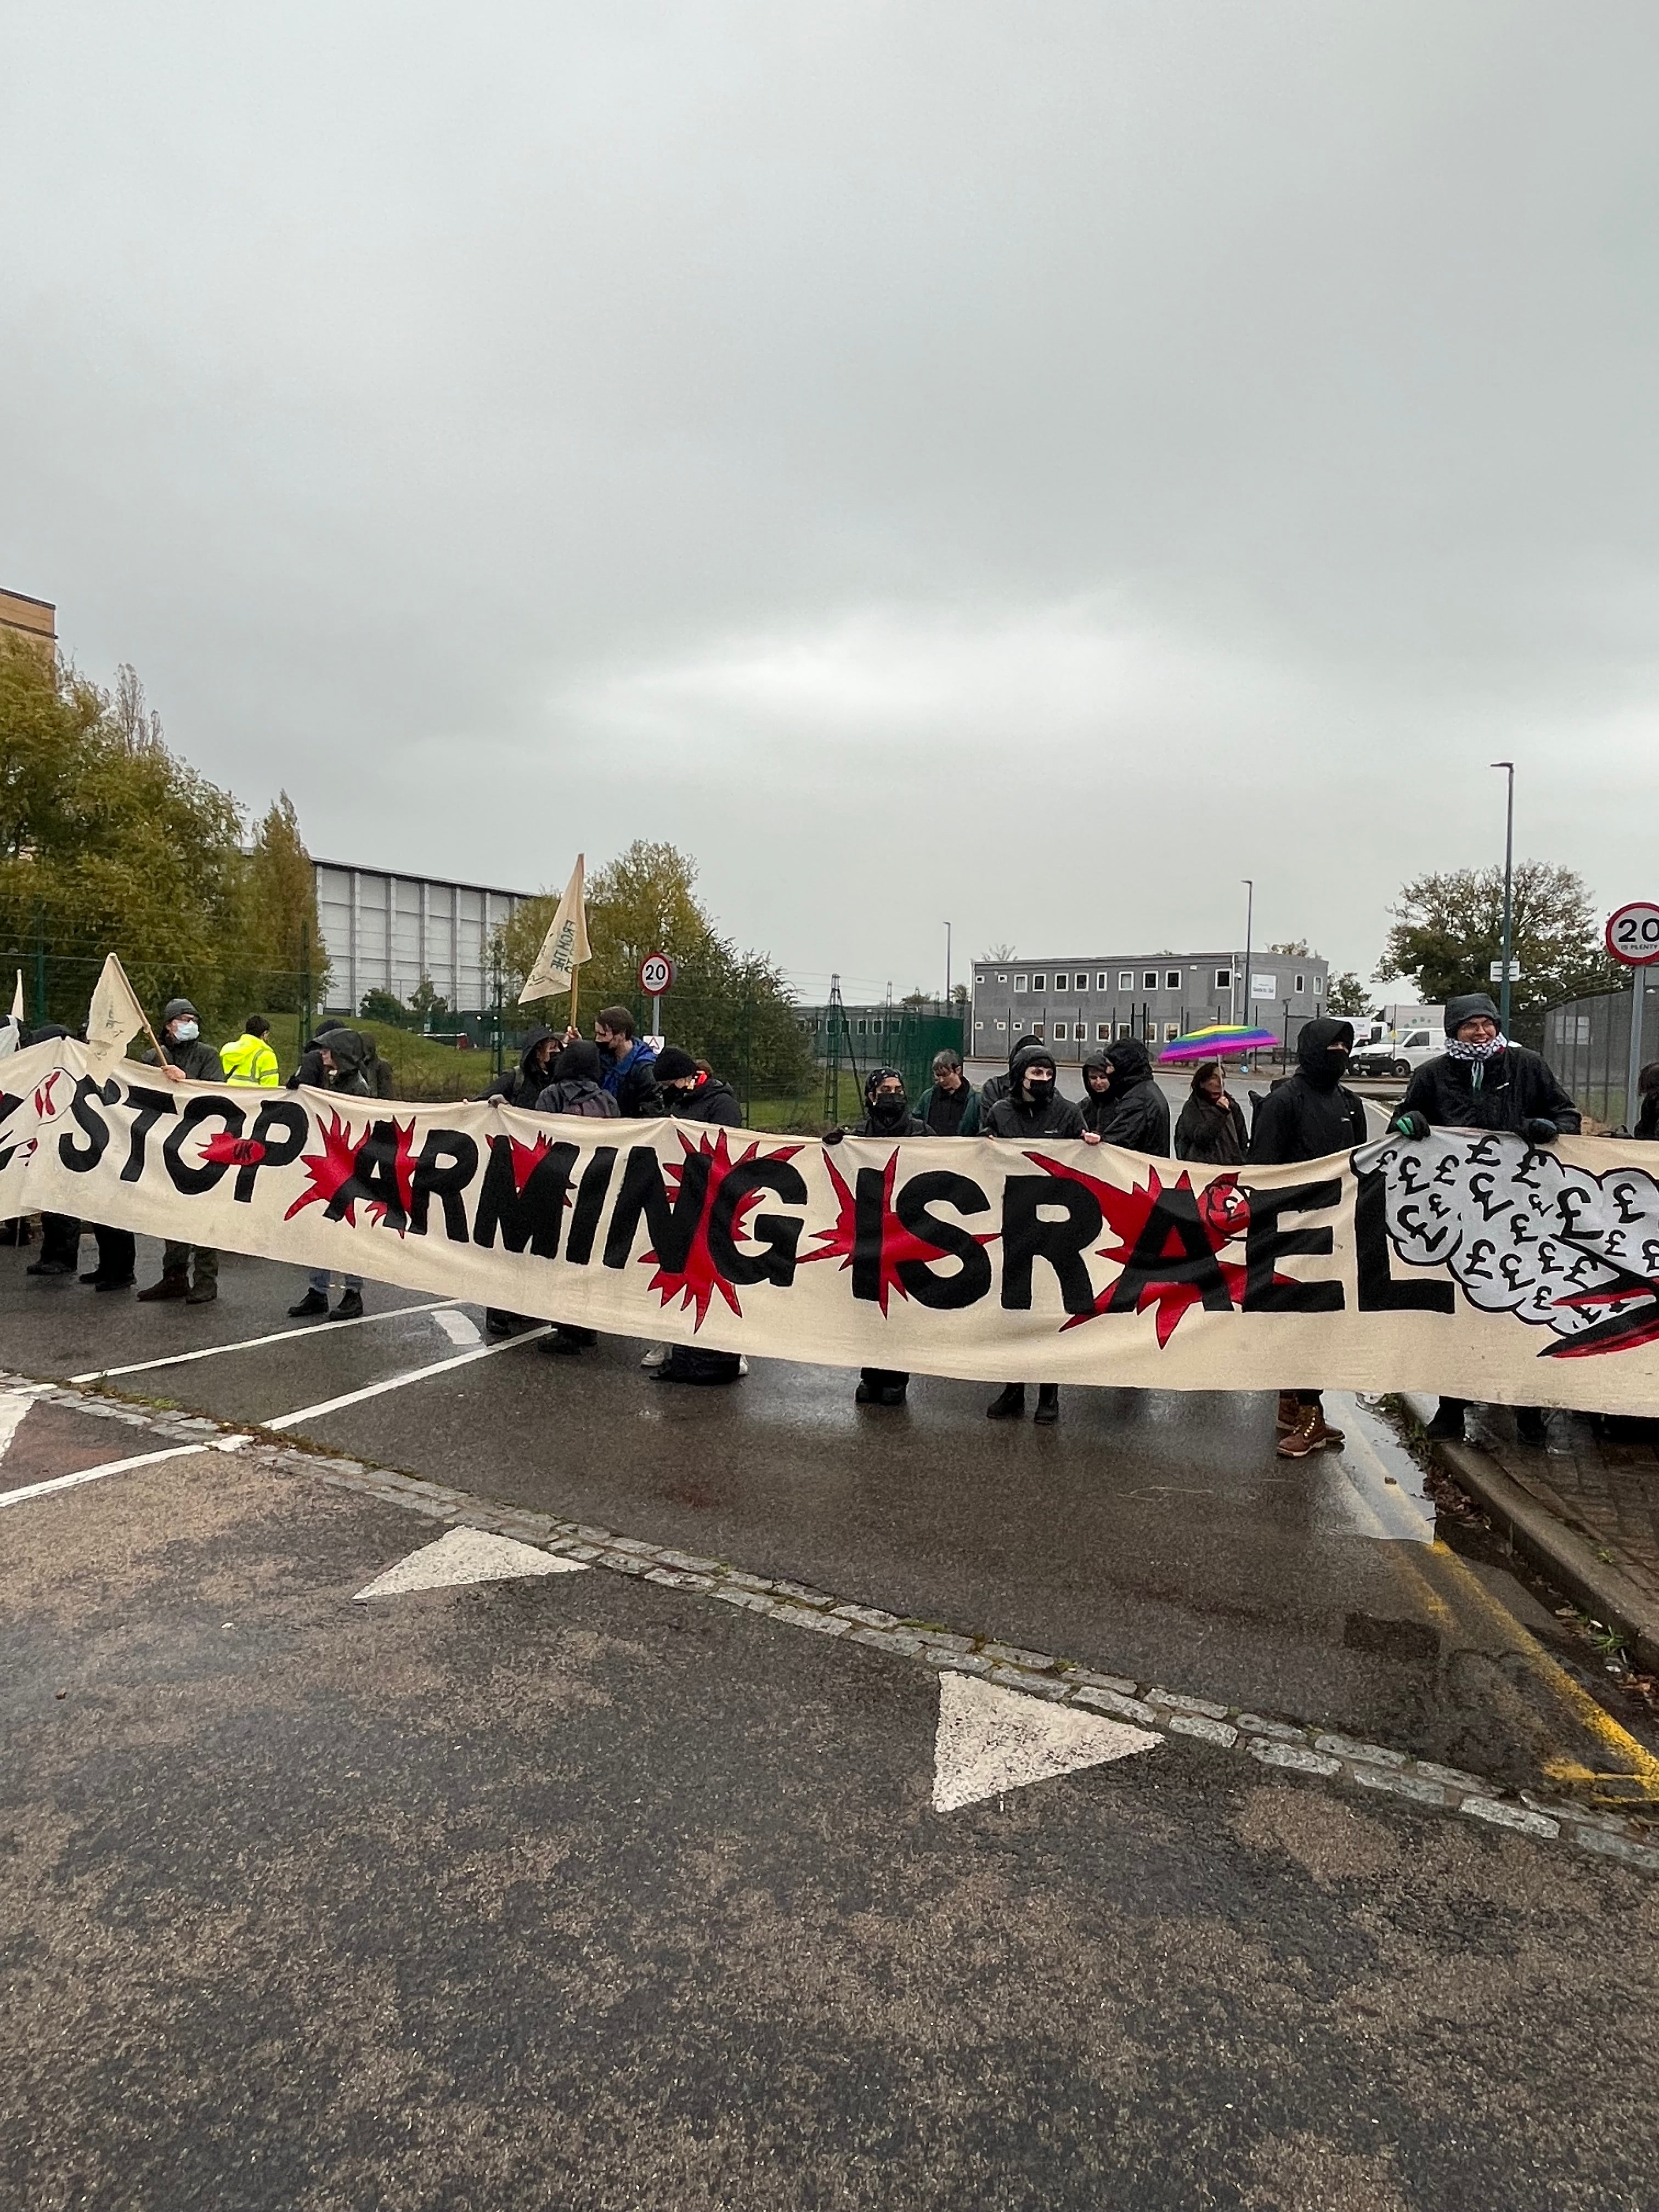 Teachers, doctors and academics were all present in urging the UK government to “Stop arming Israel”